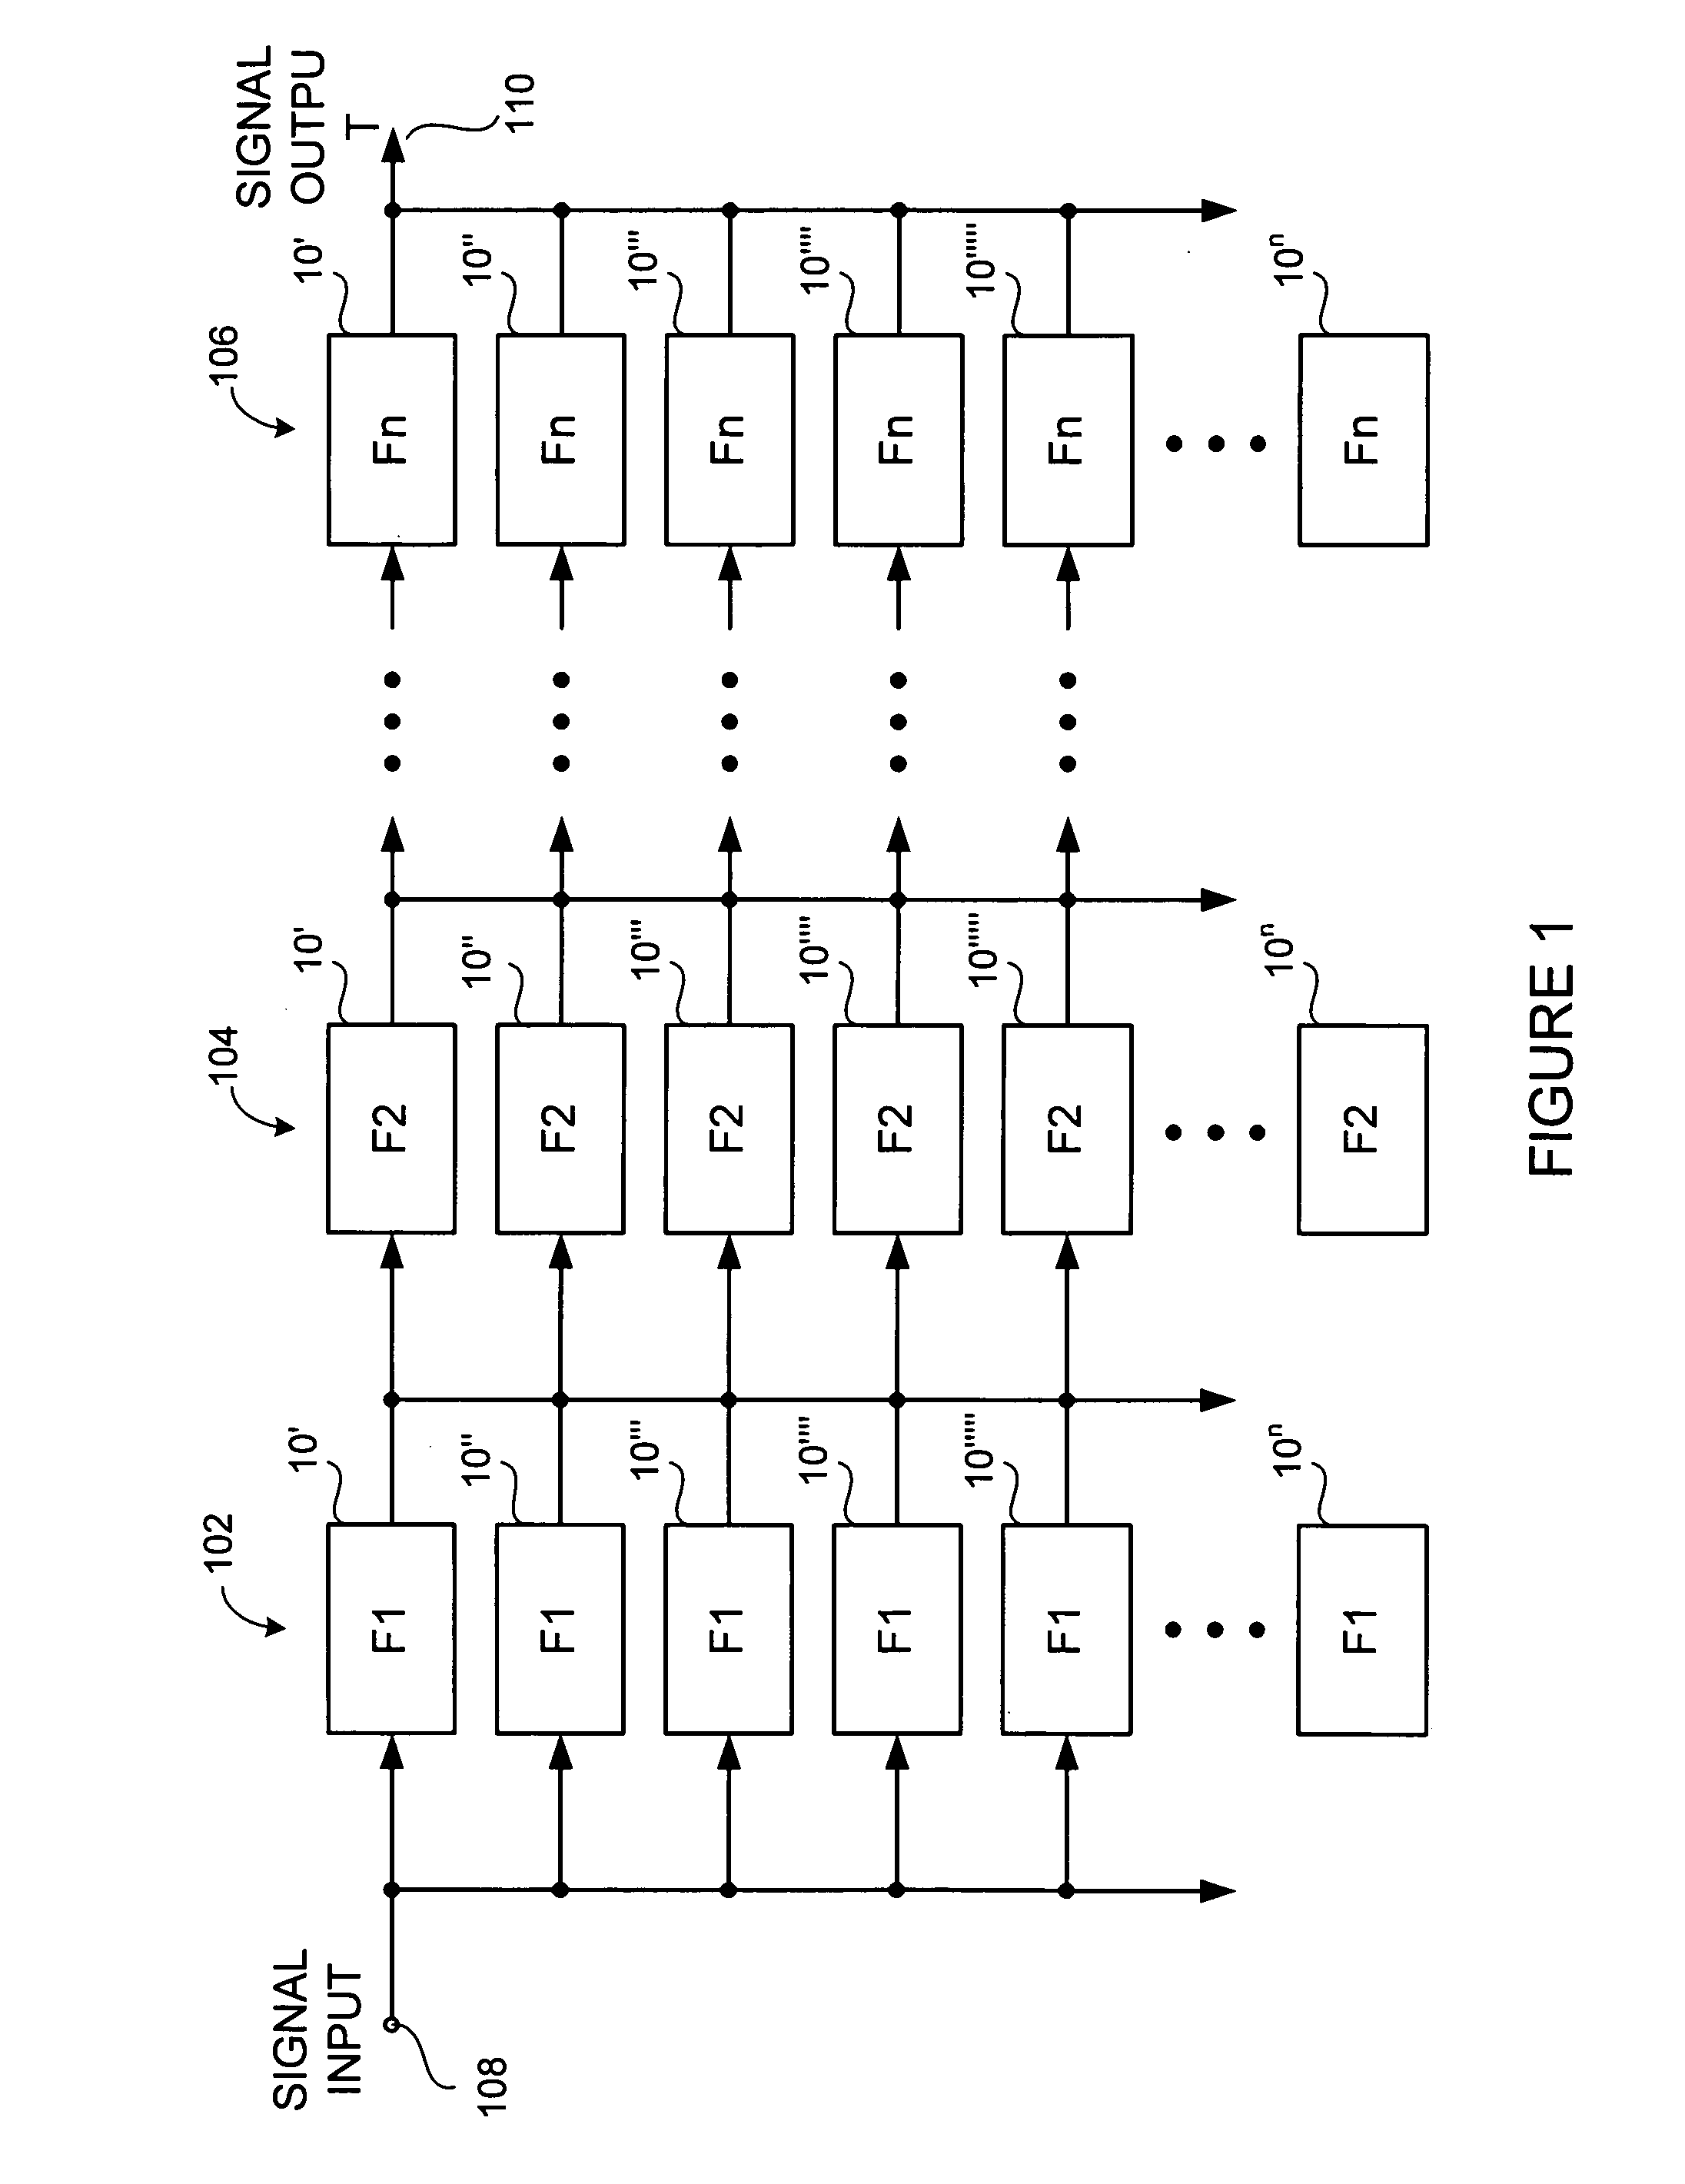 Cascading multi-band frequency notch filter